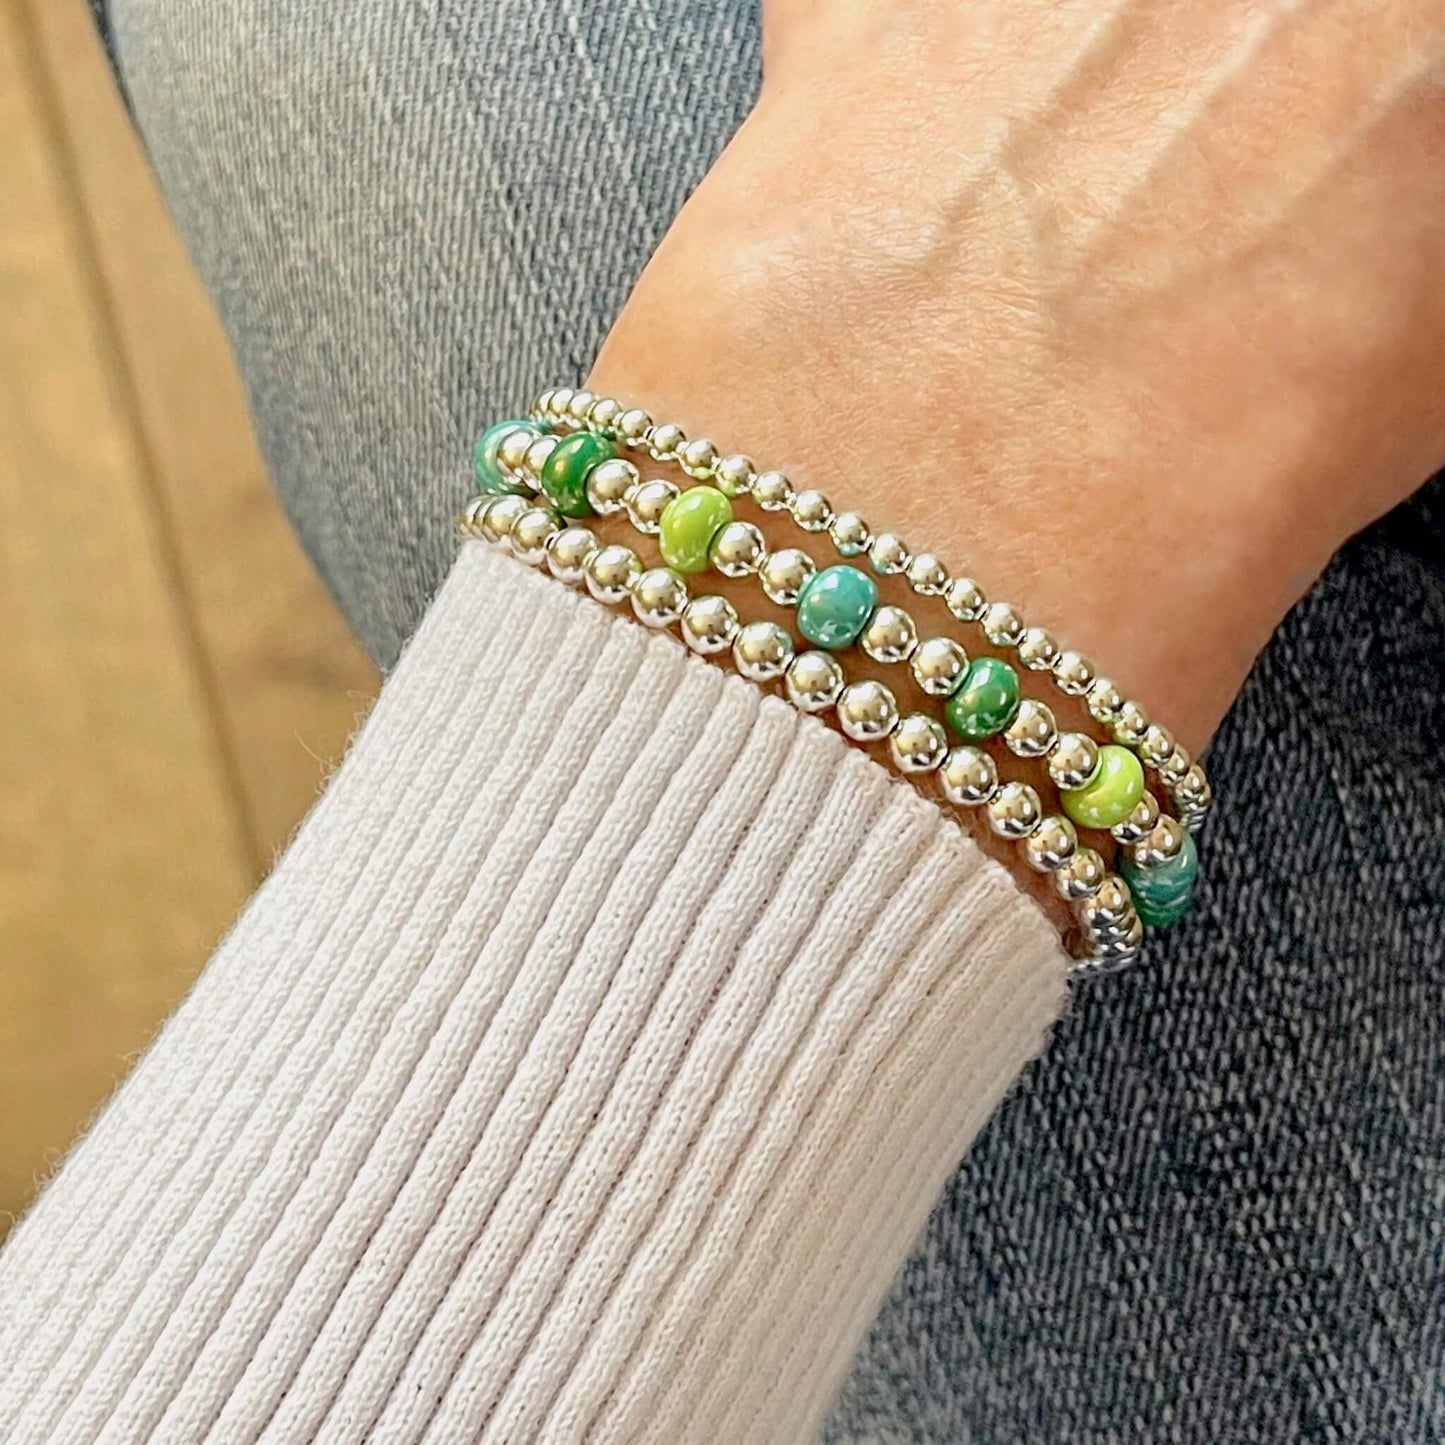 Monochomatic shades of green and sterling silver beaded ball stretch bracelet stack of 3.